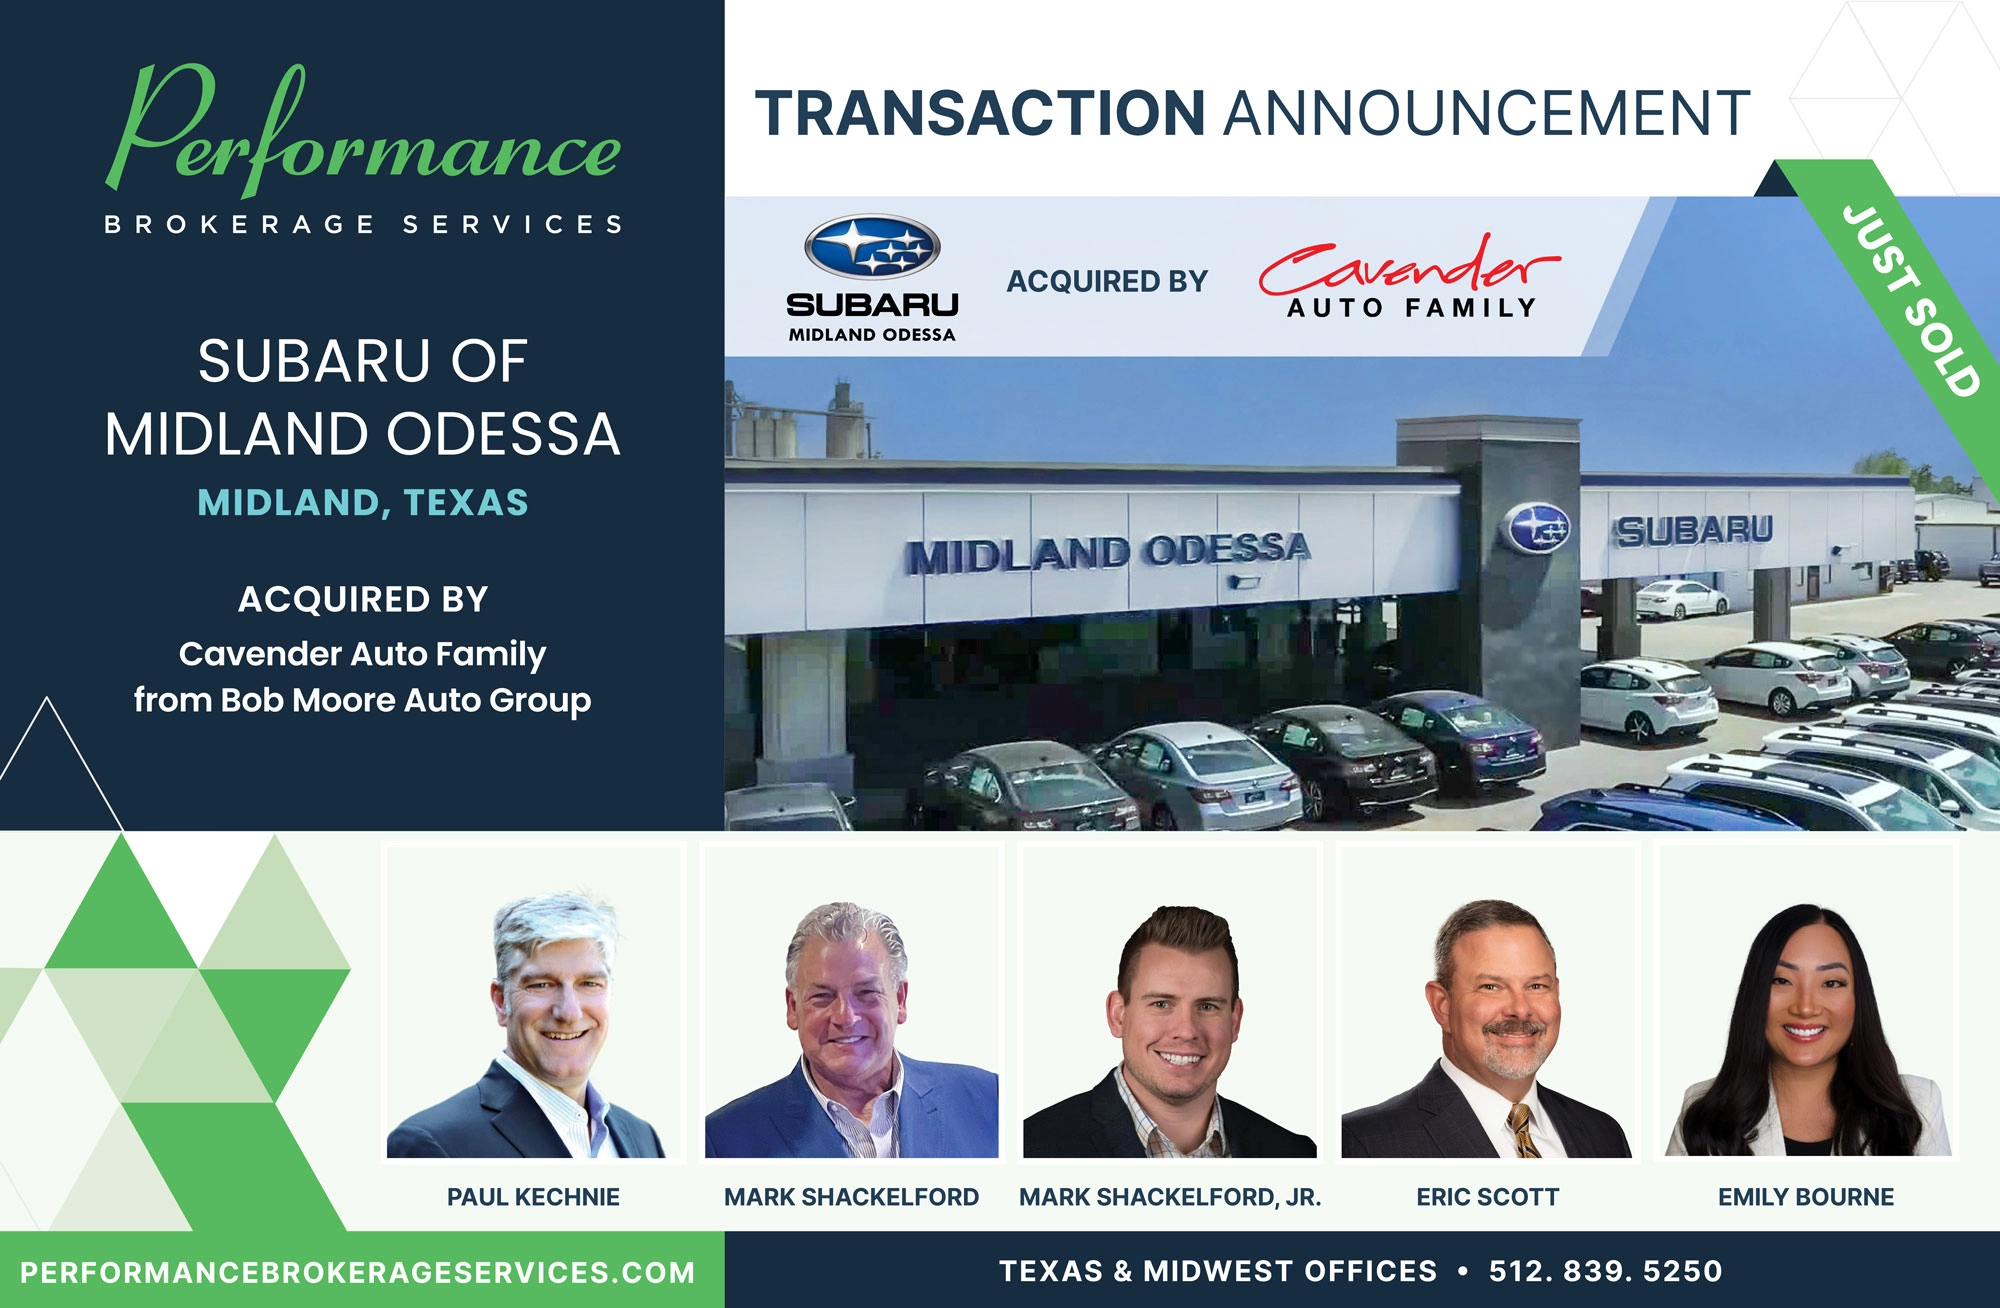 Subaru of Midland Odessa Texas sells to Cavender Auto Family from Bob Moore Auto Group with Performance Brokerage